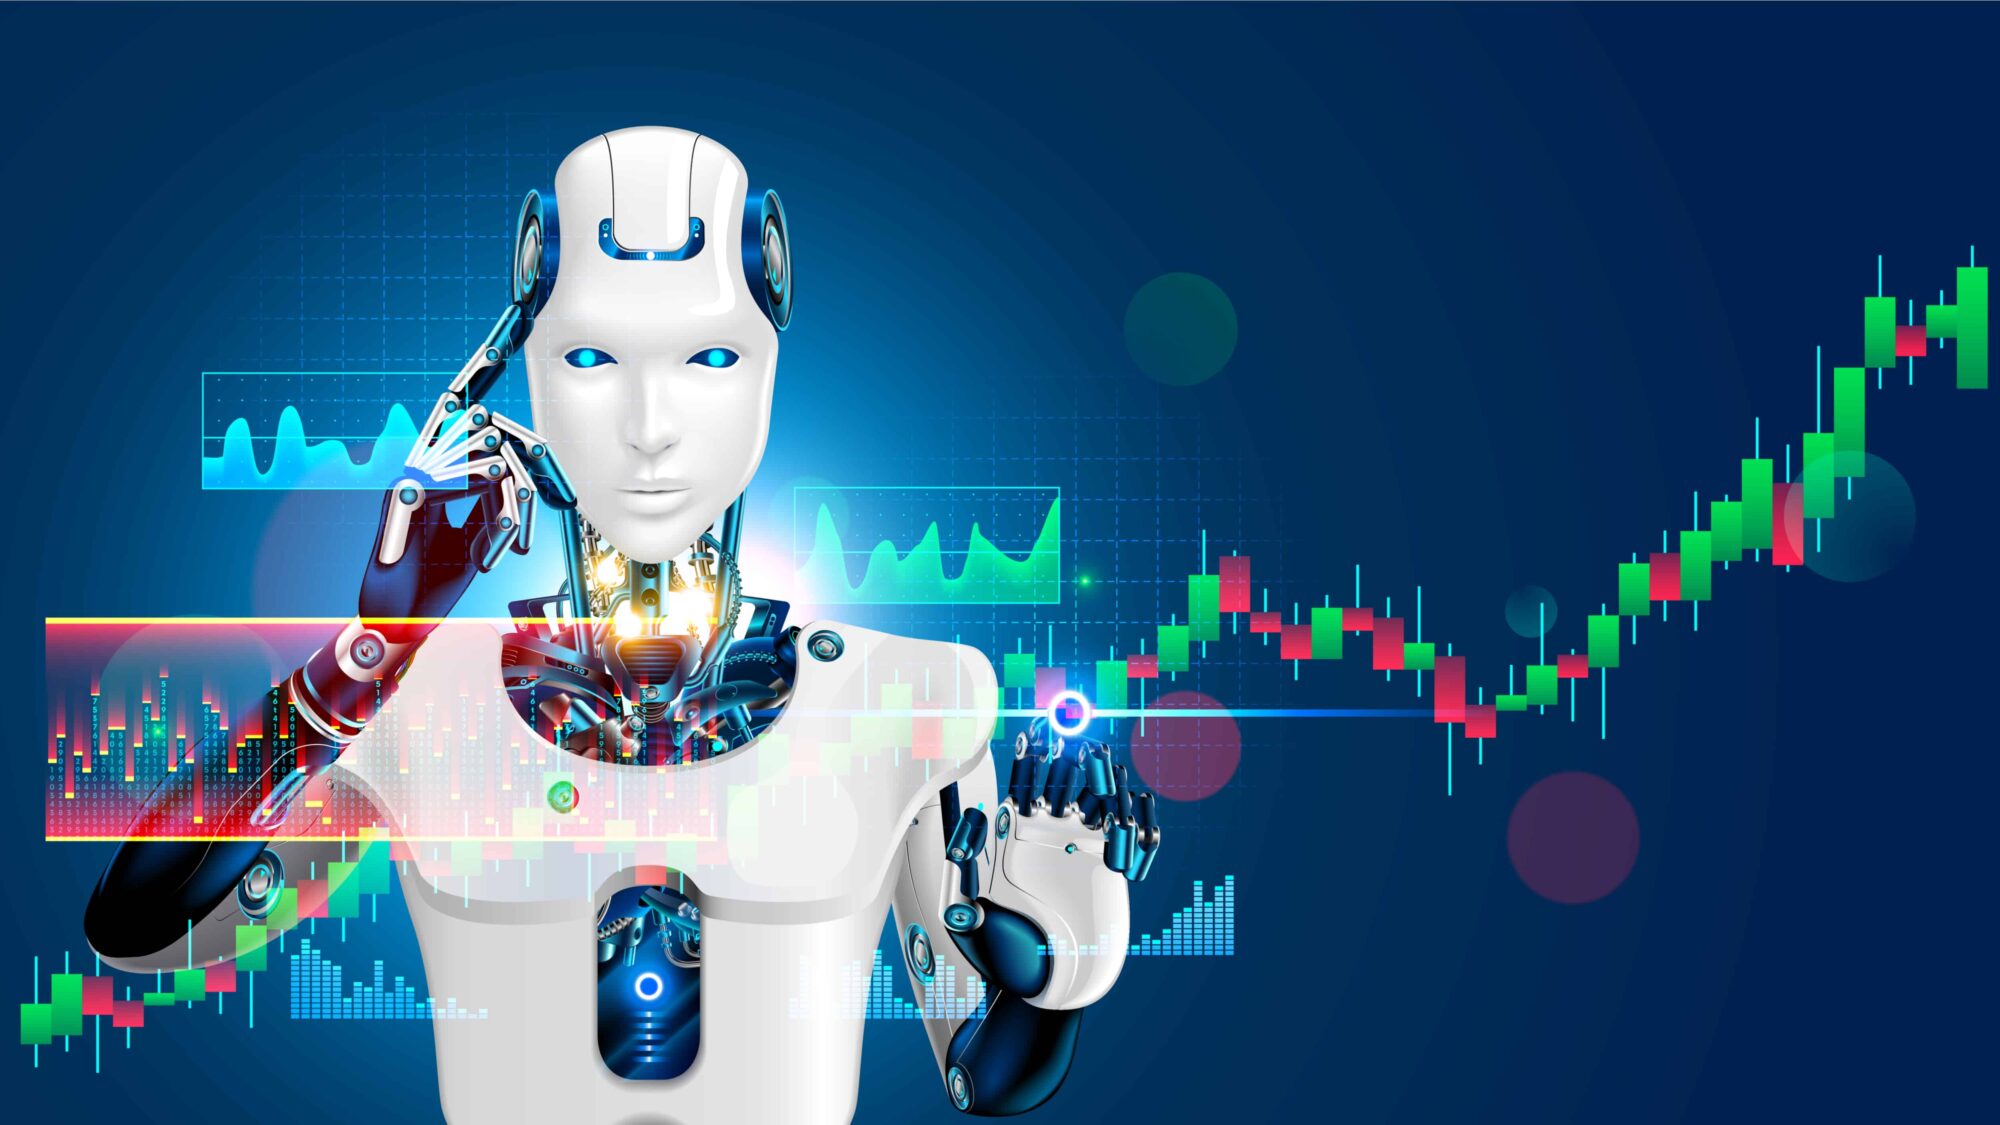 Forex robots and automated trading software cash out bitcoins